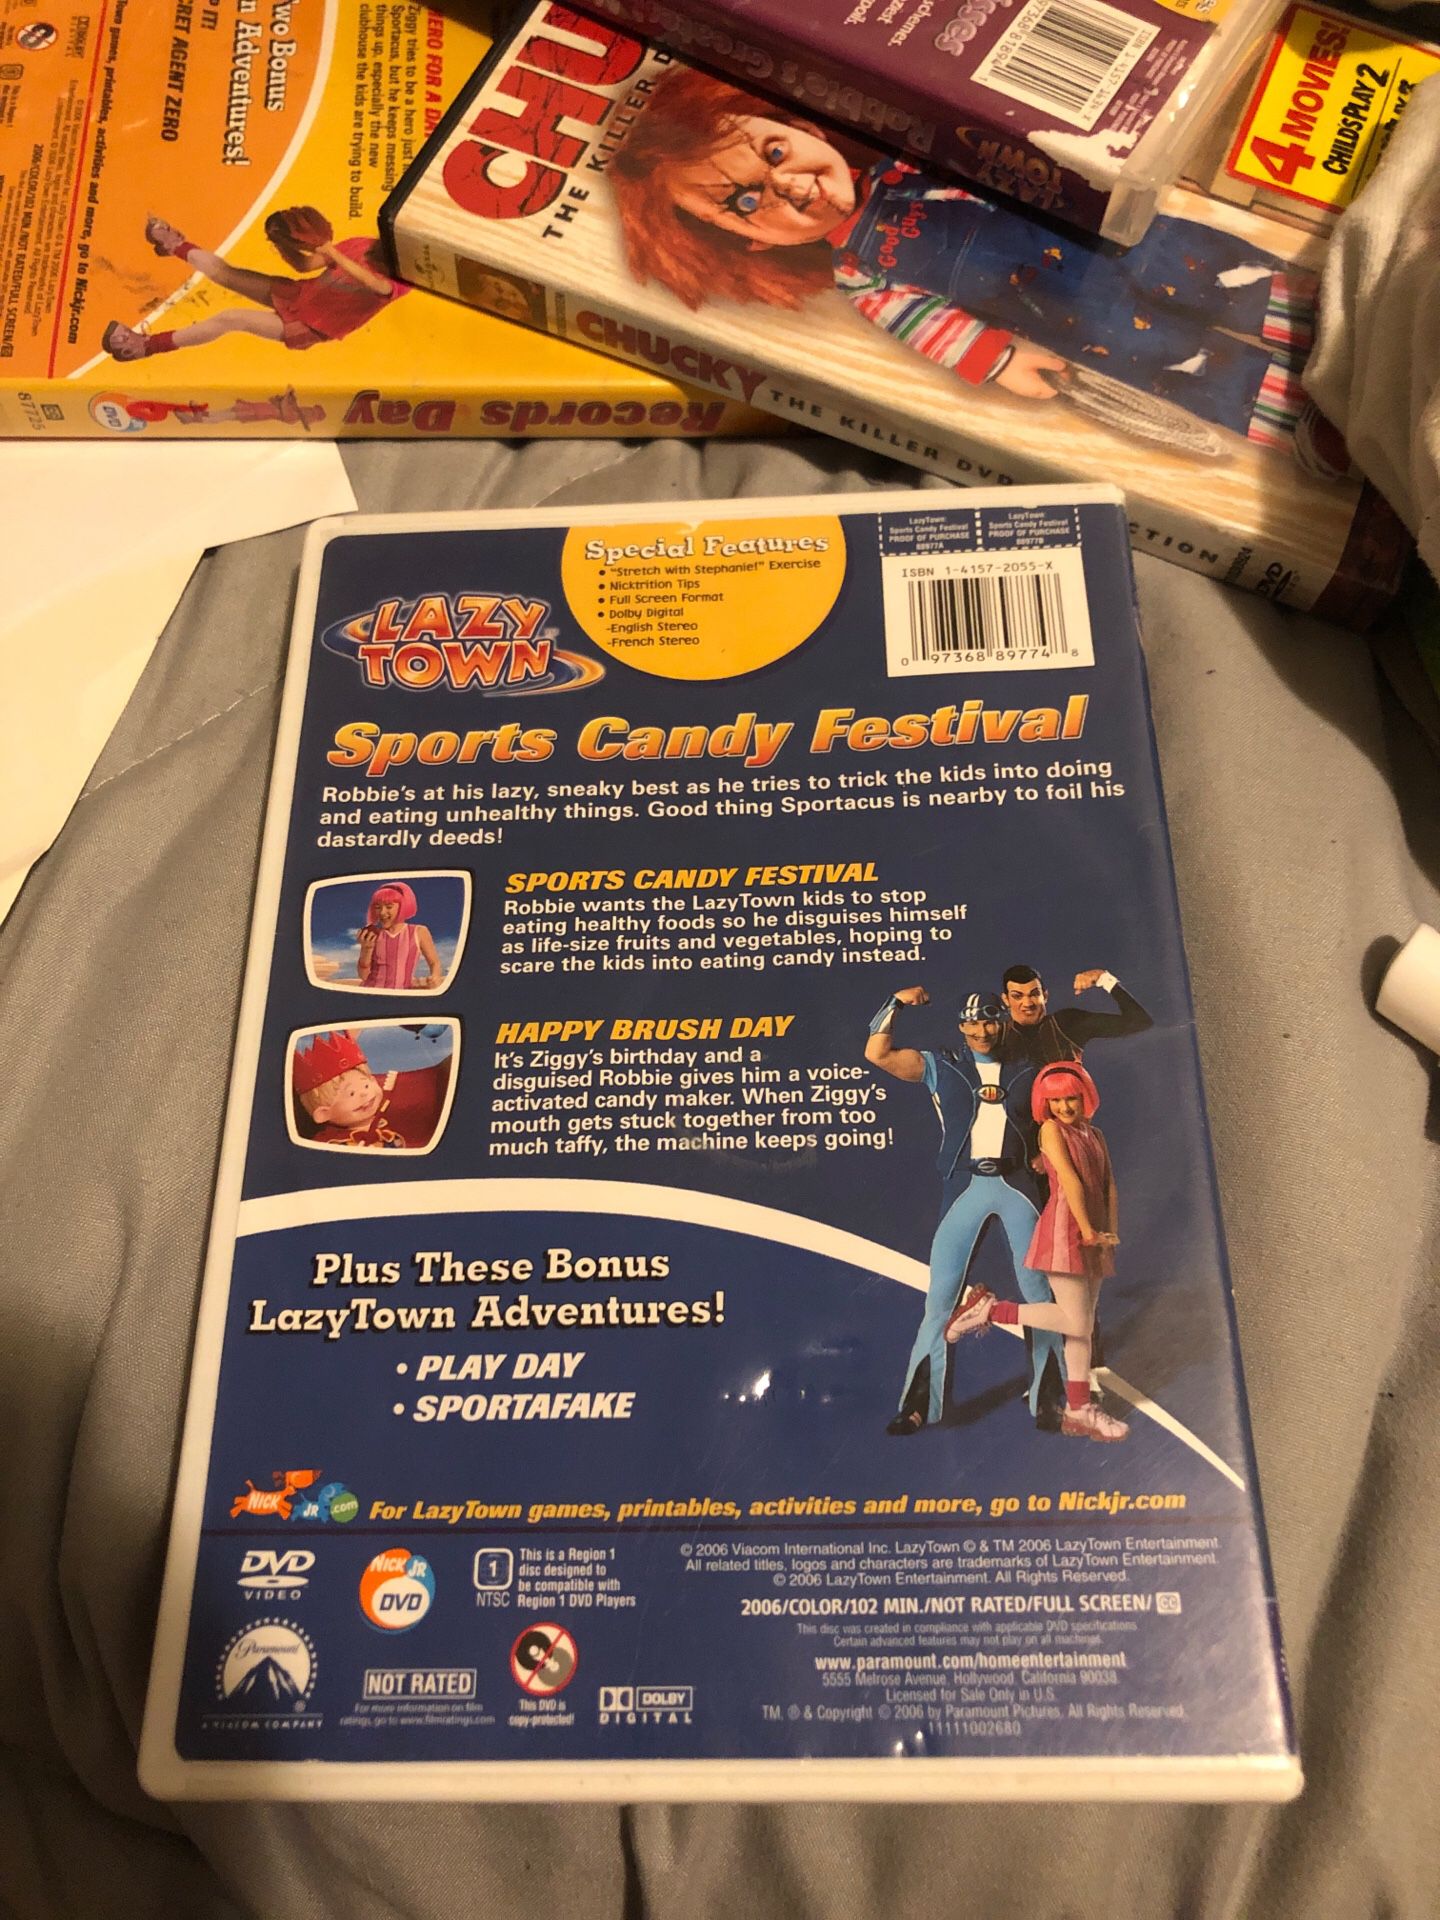 LazyTown sports candy festival